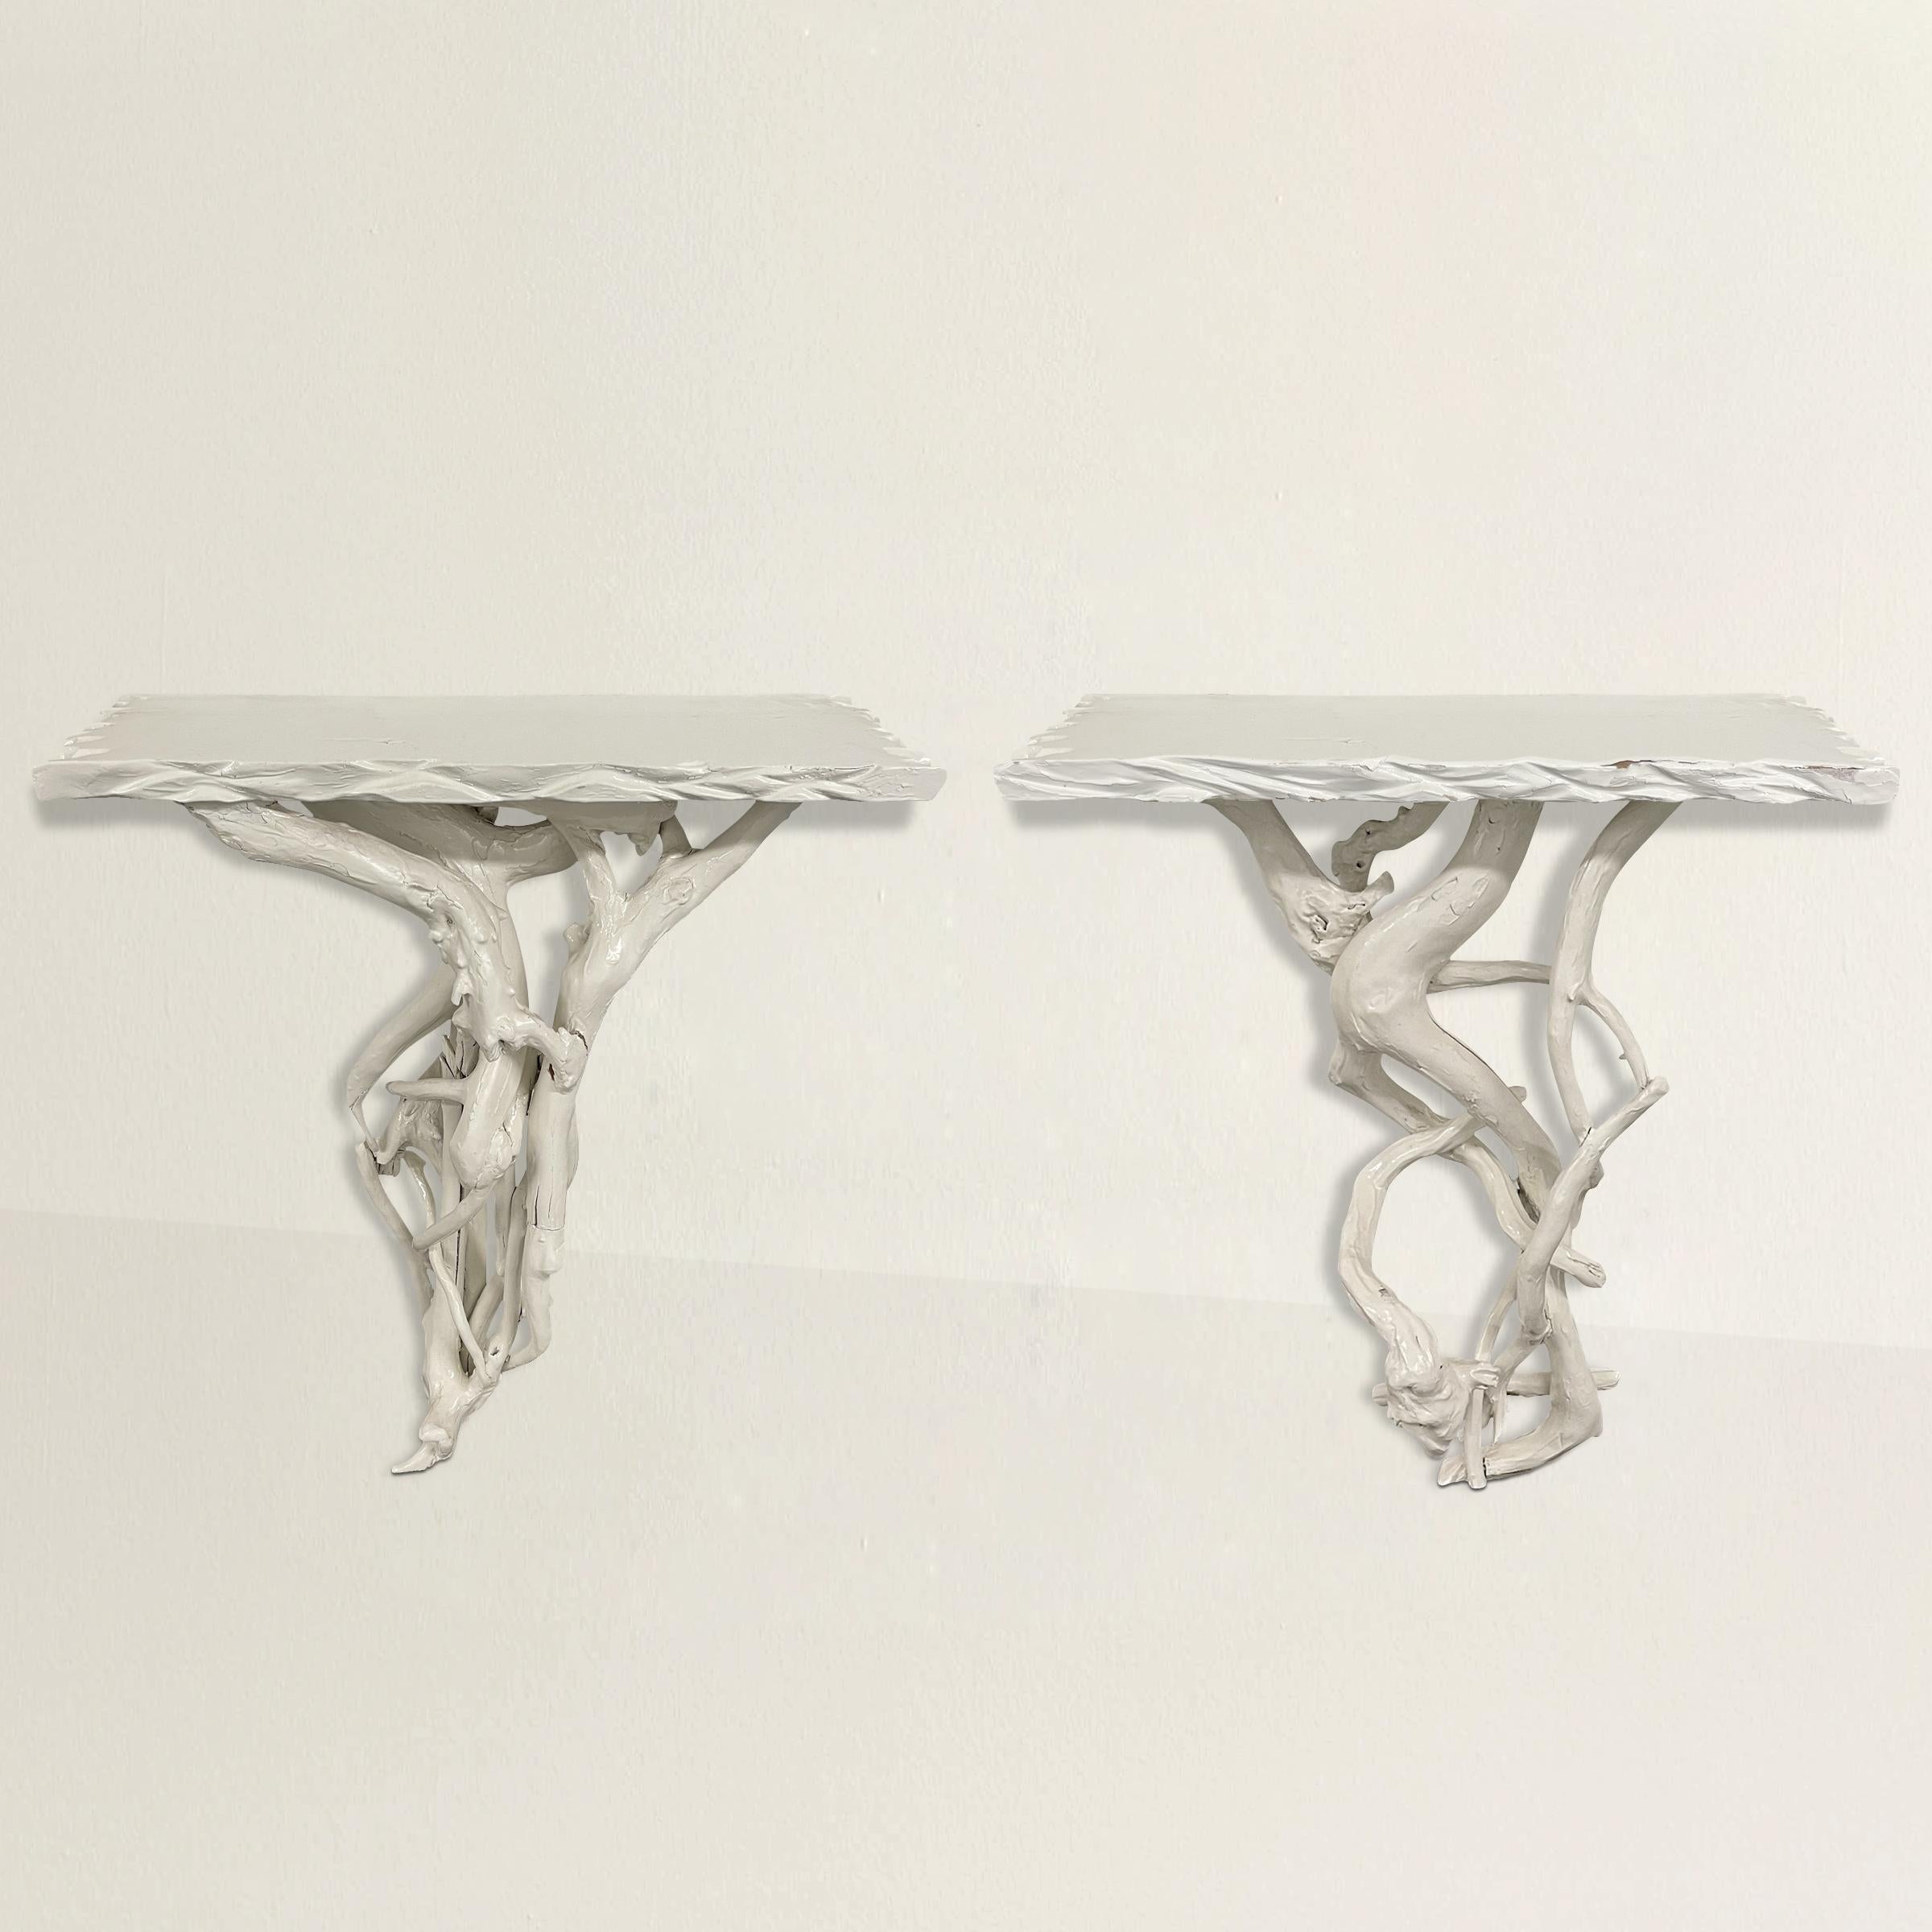 A chic pair of mid-20th century American wall-mounted lacquered console tables each designed with multiple twisted roots forming the bases and chip-carved wood tops, and both completely covered with a shiny white lacquer. Tables can be mounted so